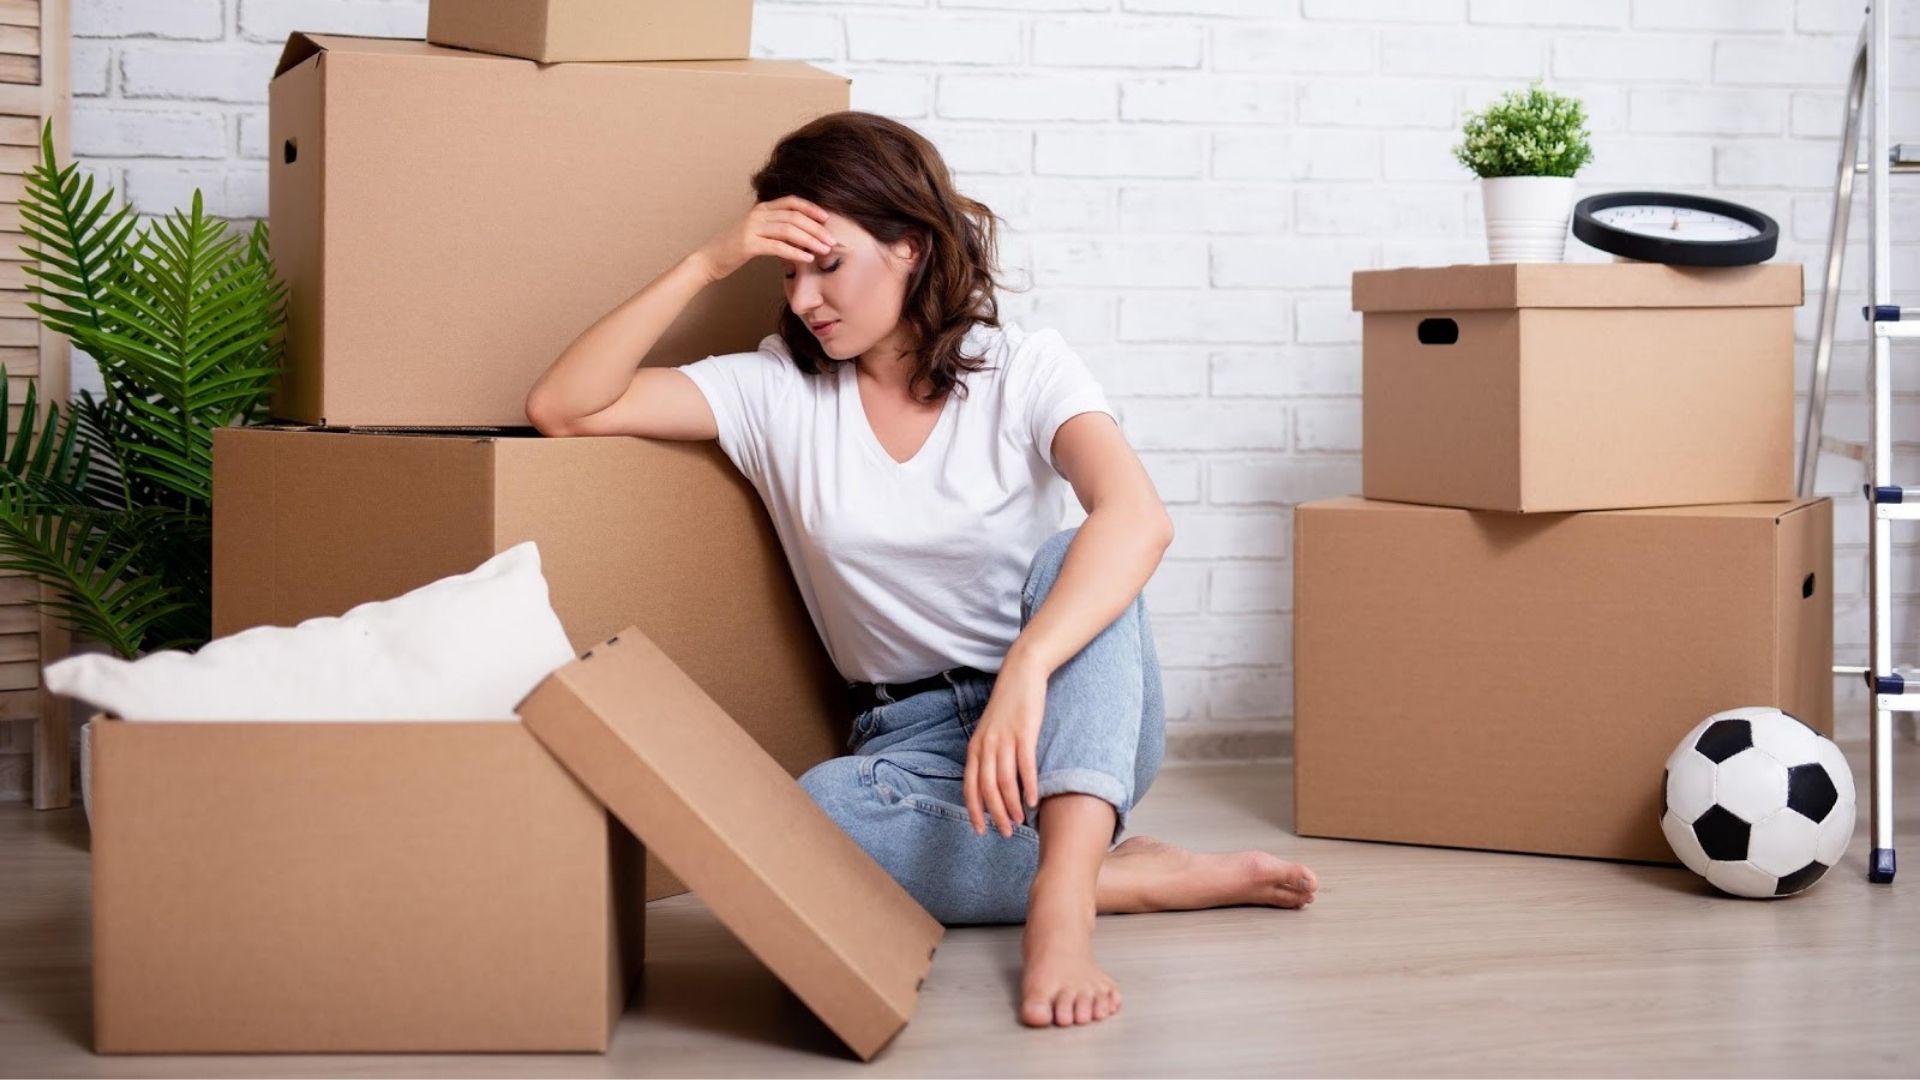 What Problems You May Face During a Household Move?